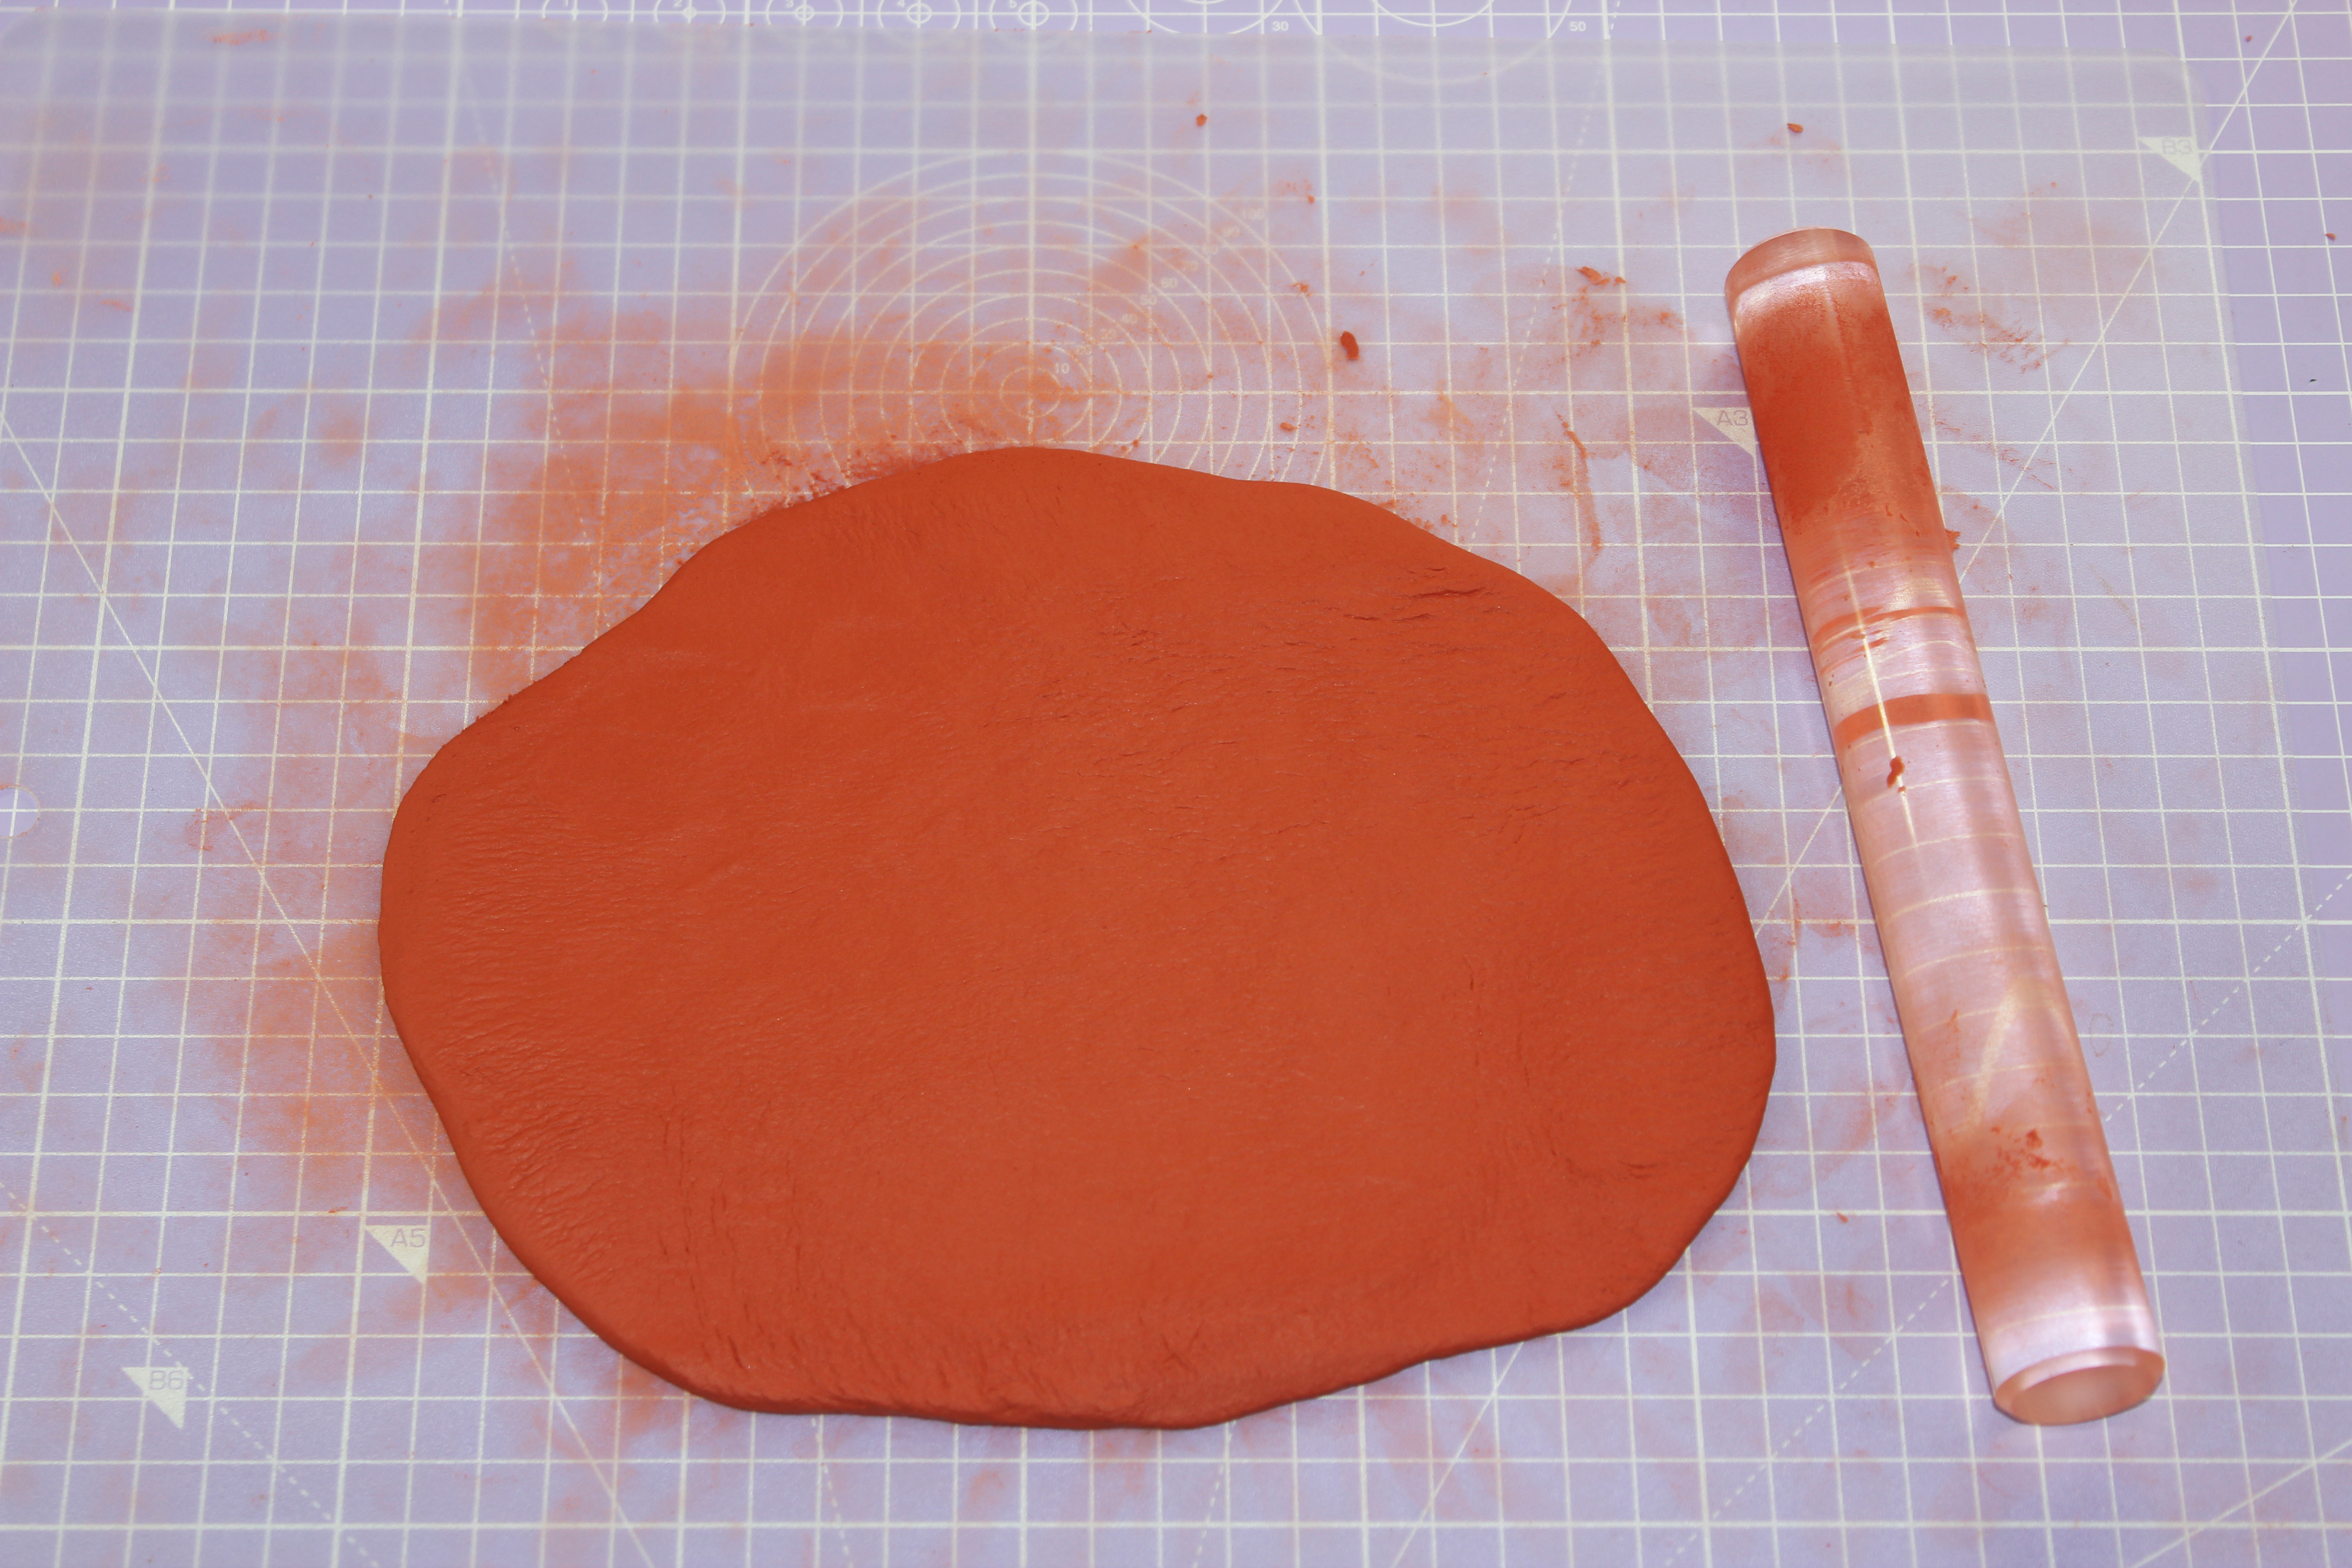 How to use air dry clay, air dry clay projects – step 2